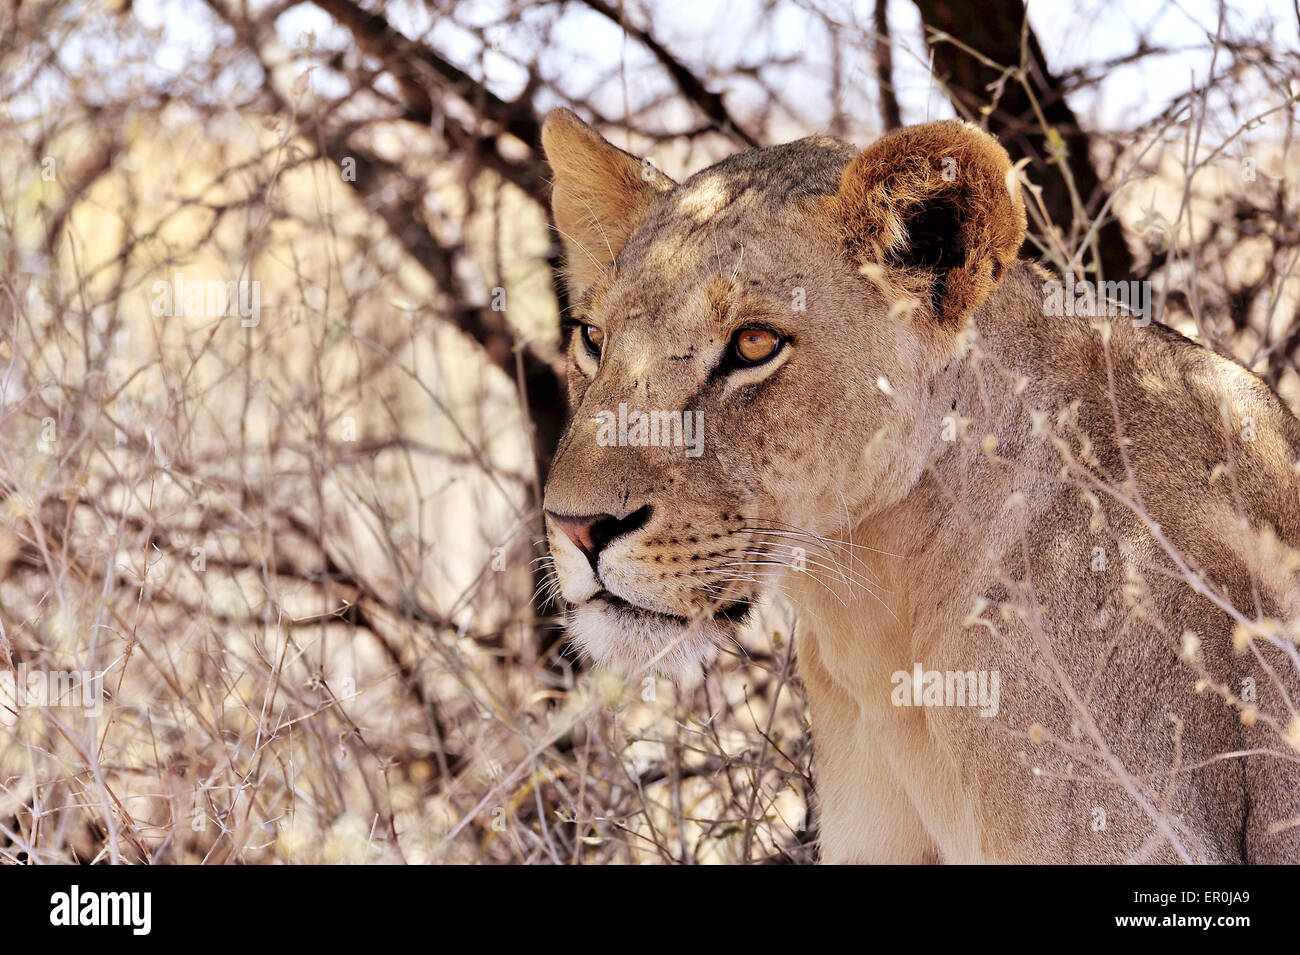 Fascinating face and eyes of a Lion Stock Photo